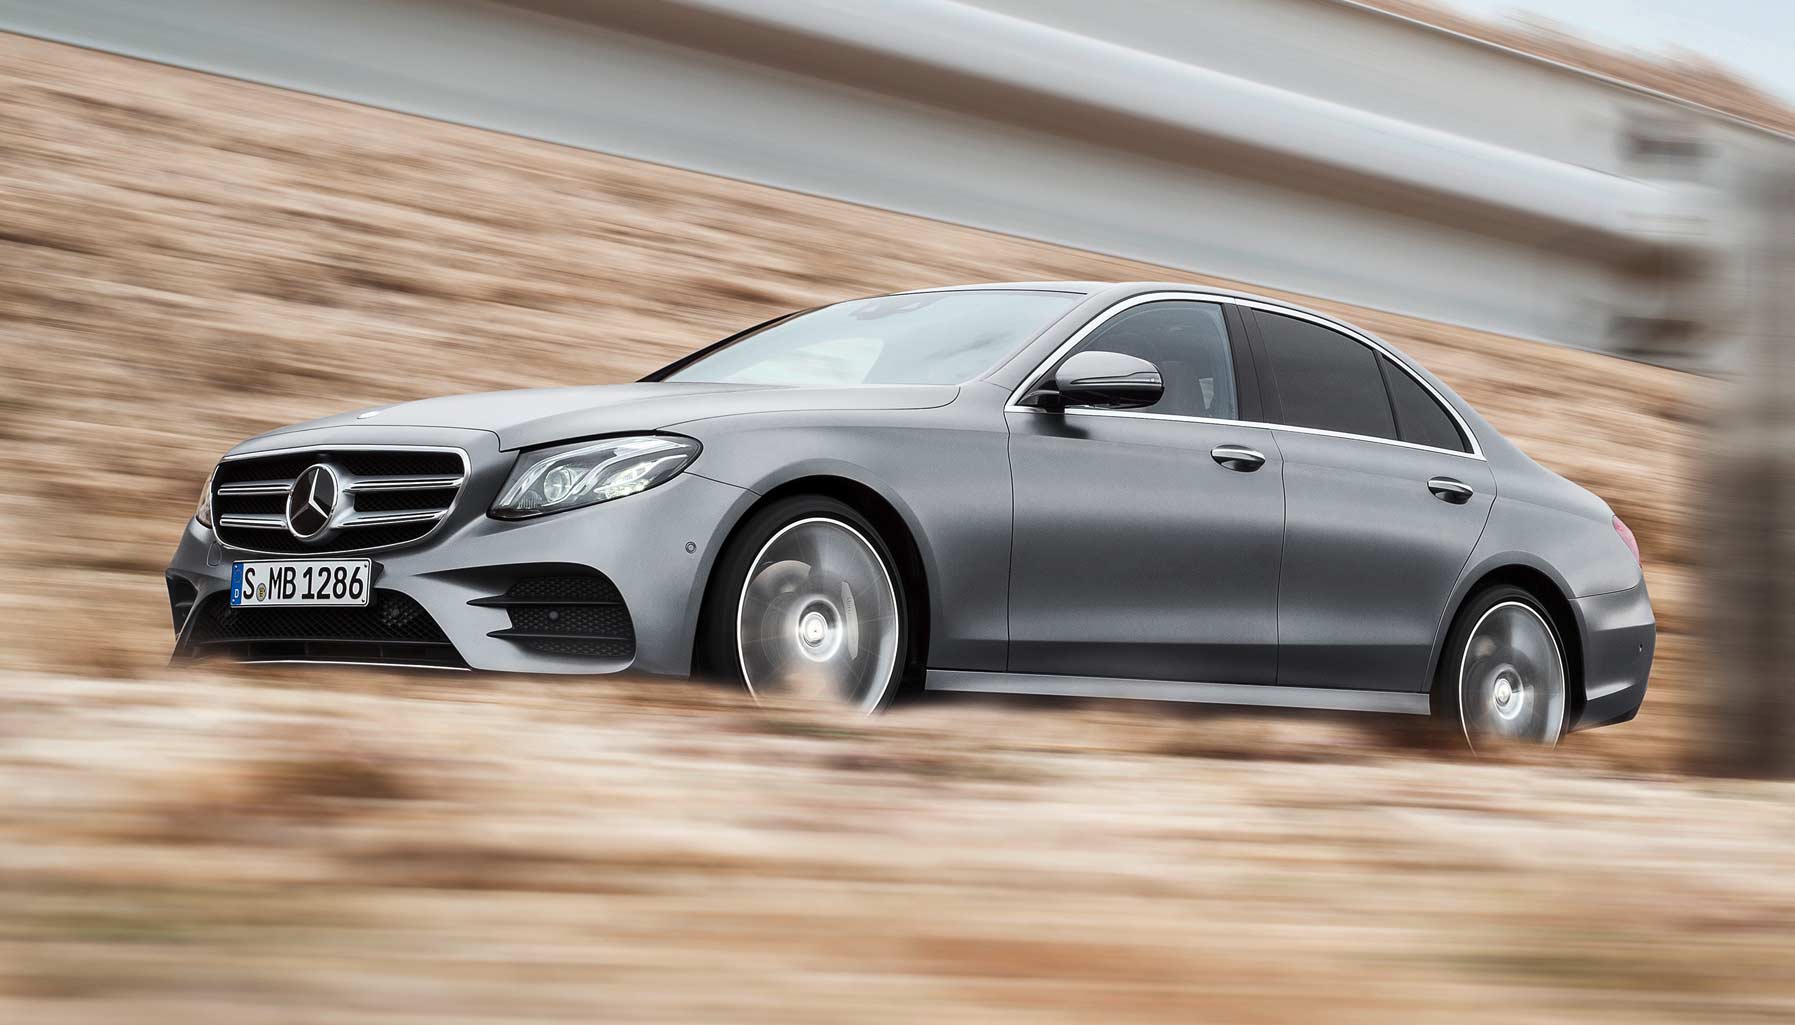 Purchase to Mercedes-Benz’s fifth-generation E-Class